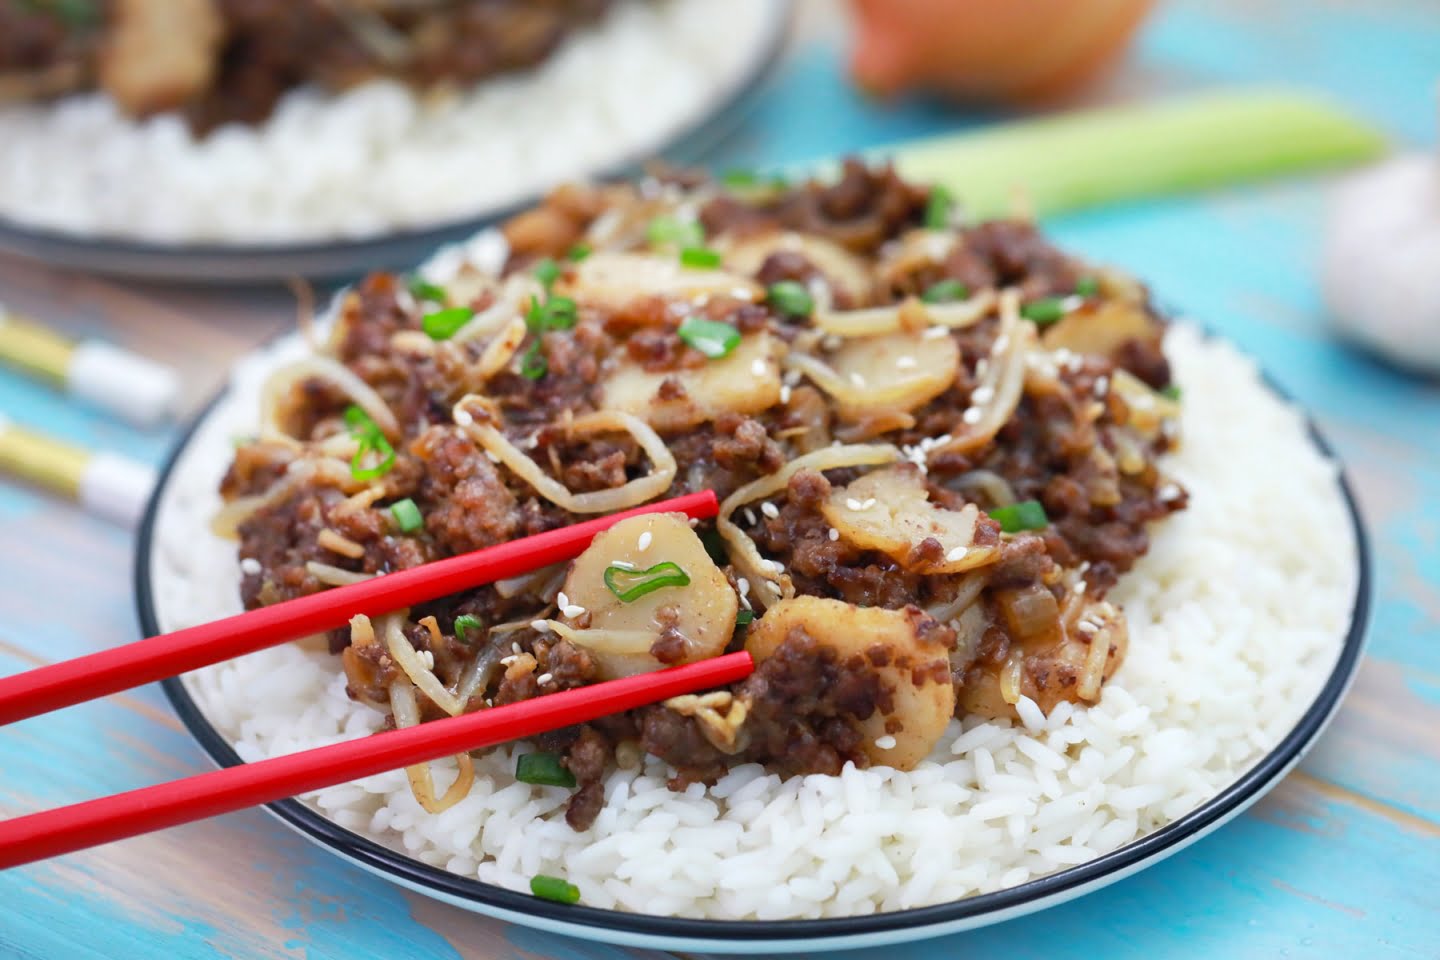 Beef chop suey with rice